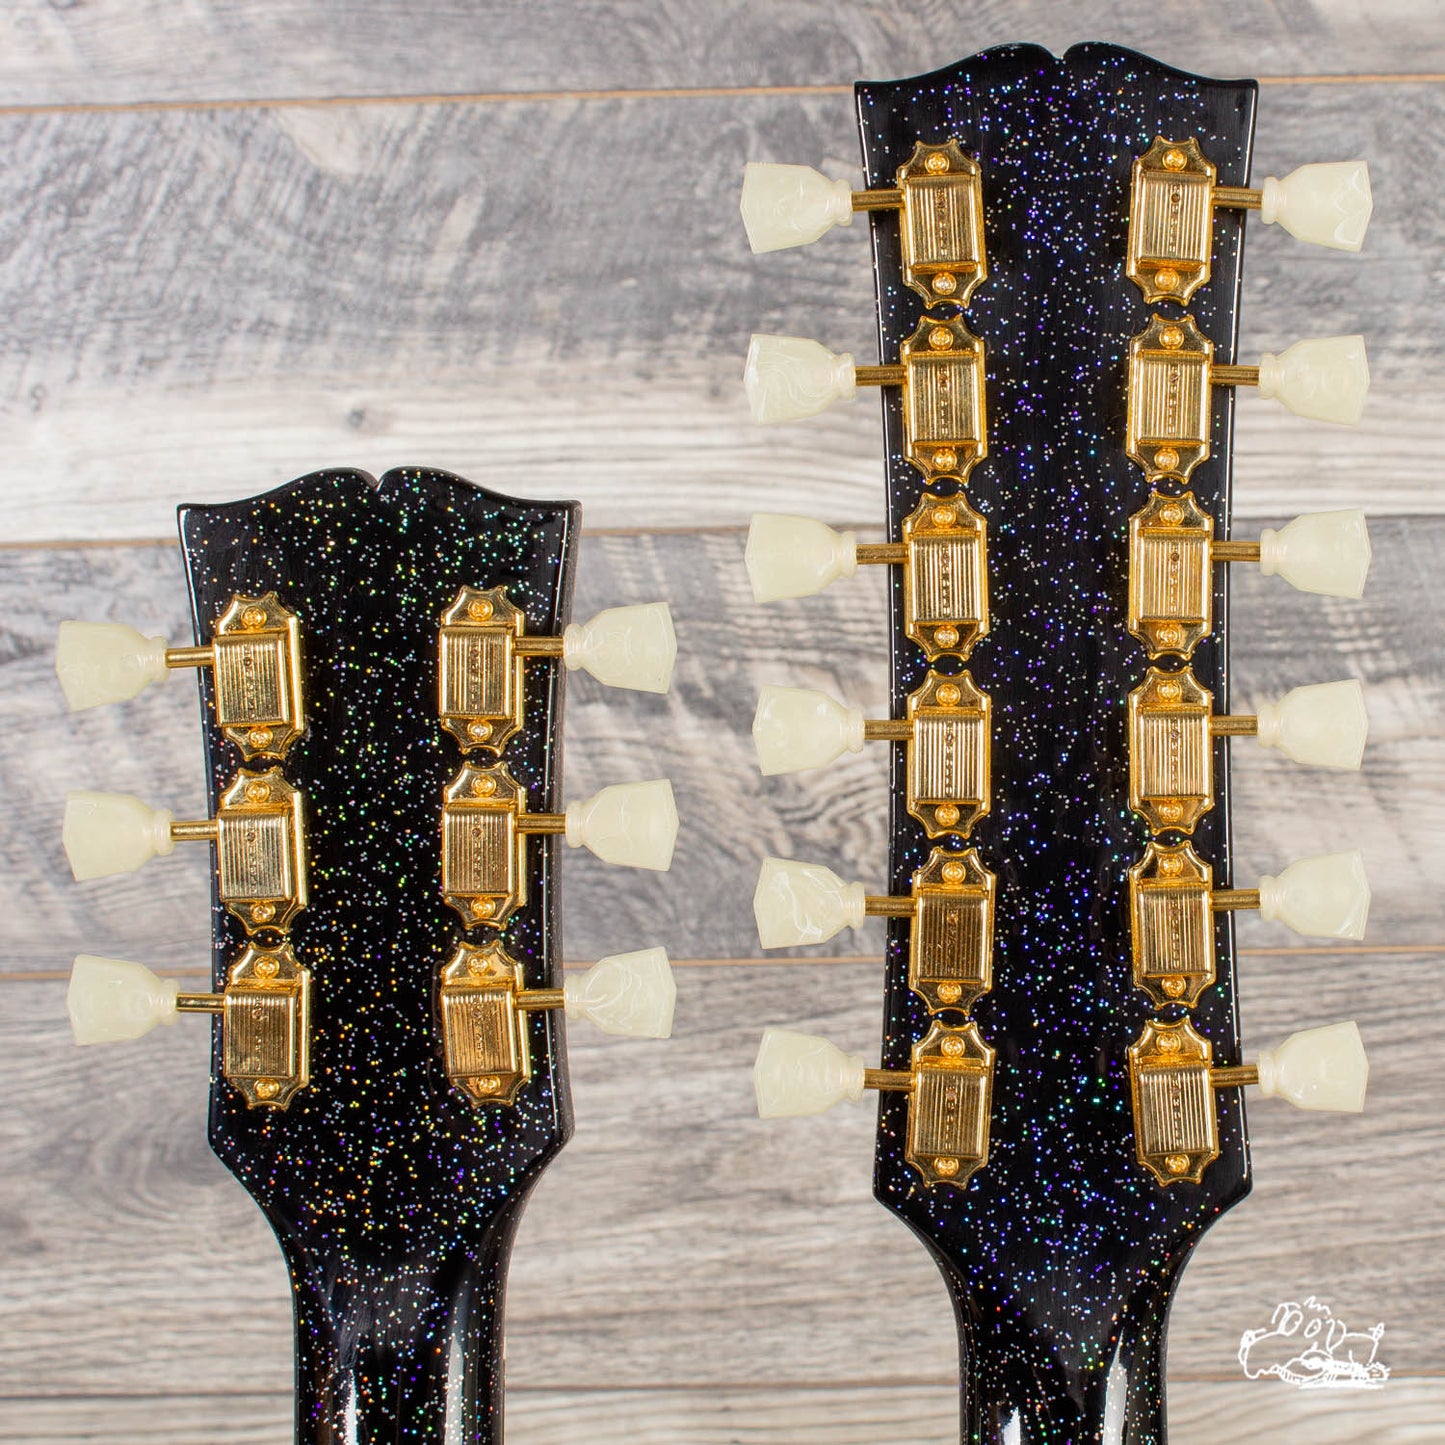 Bell & Hern Double Neck SG-Style - "Black Galaxy" Sparkle